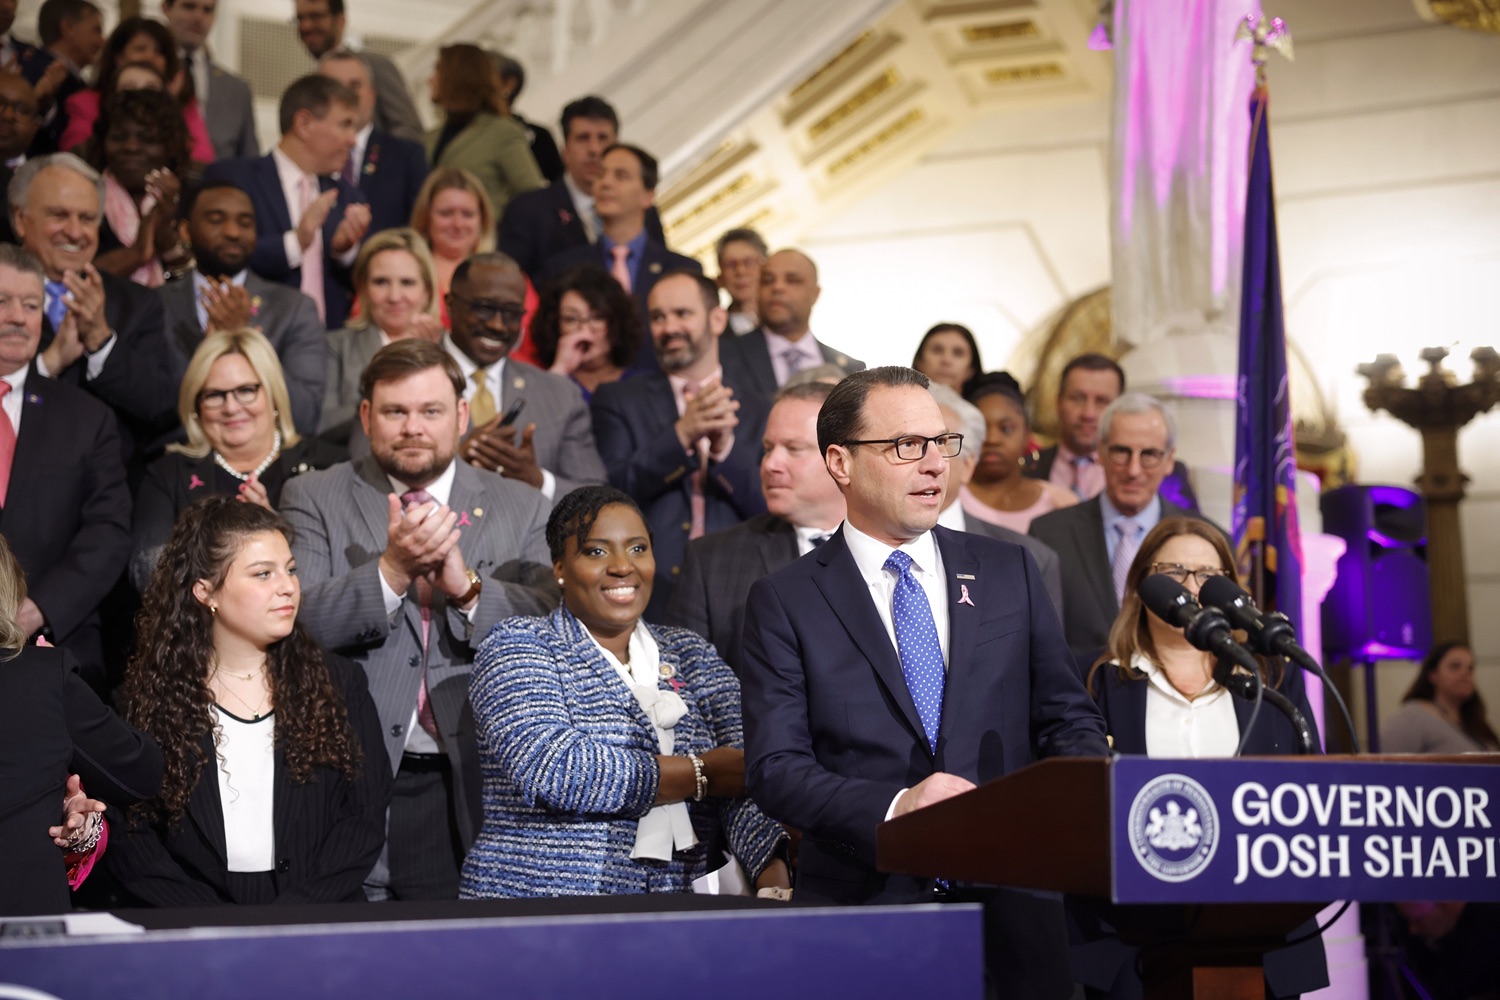 Governor Josh Shapiro signed the first bill of his Administration - Act 1 of 2023, a first-of-its-kind law in the nation that will require insurers to cover preventive breast and ovarian cancer screenings for high-risk women at no cost. MAY 01, 2023 - HARRISBURG, PA<br><a href="https://filesource.amperwave.net/commonwealthofpa/photo/23041_gov_sb8_dz_010.JPG" target="_blank">⇣ Download Photo</a>